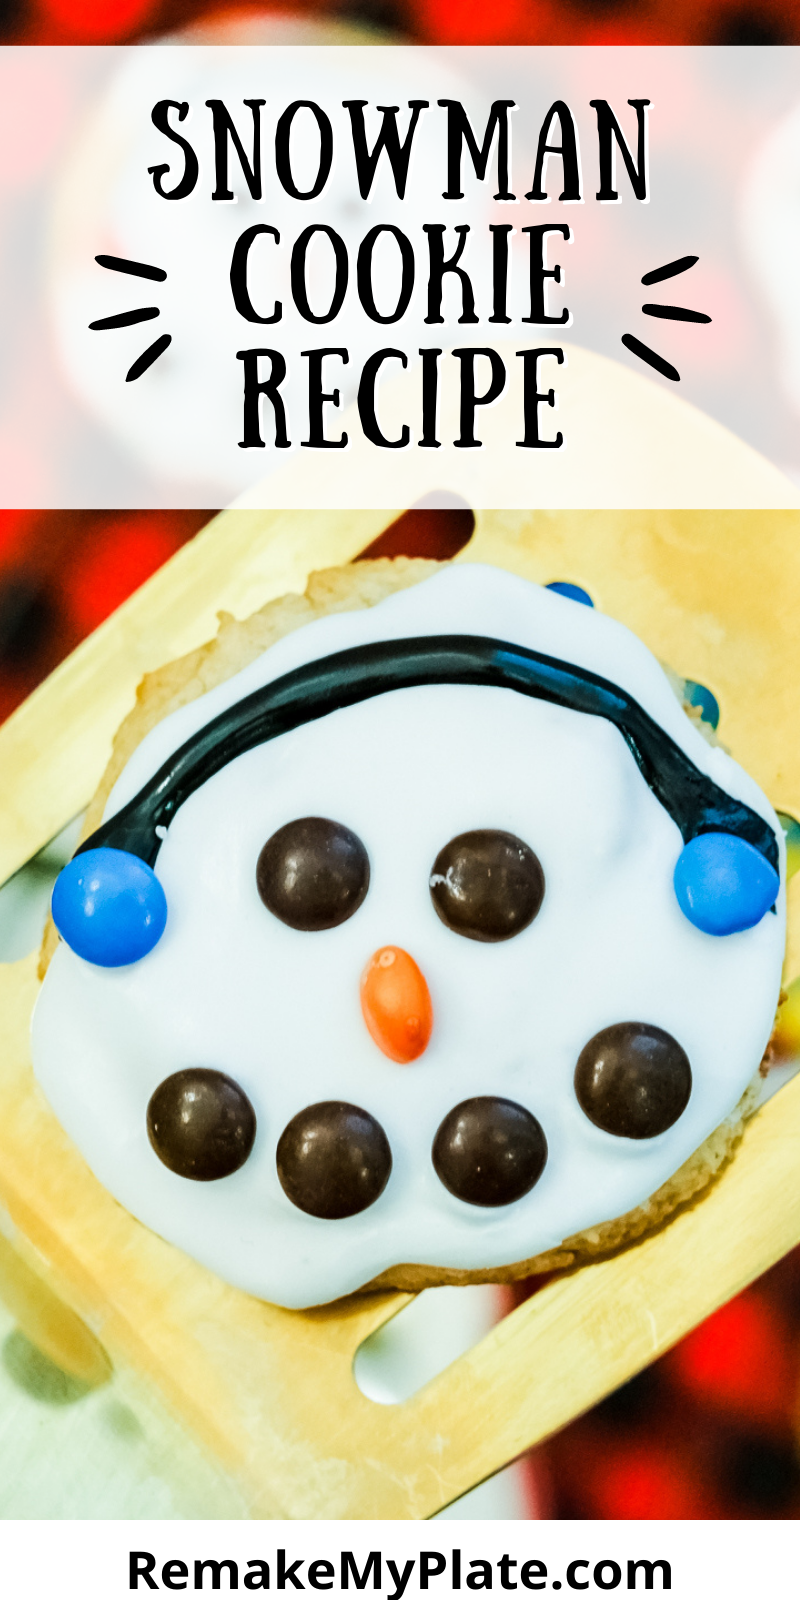 Snowman Cookies Recipe is a cake mix cookie decorated to look like a snowman